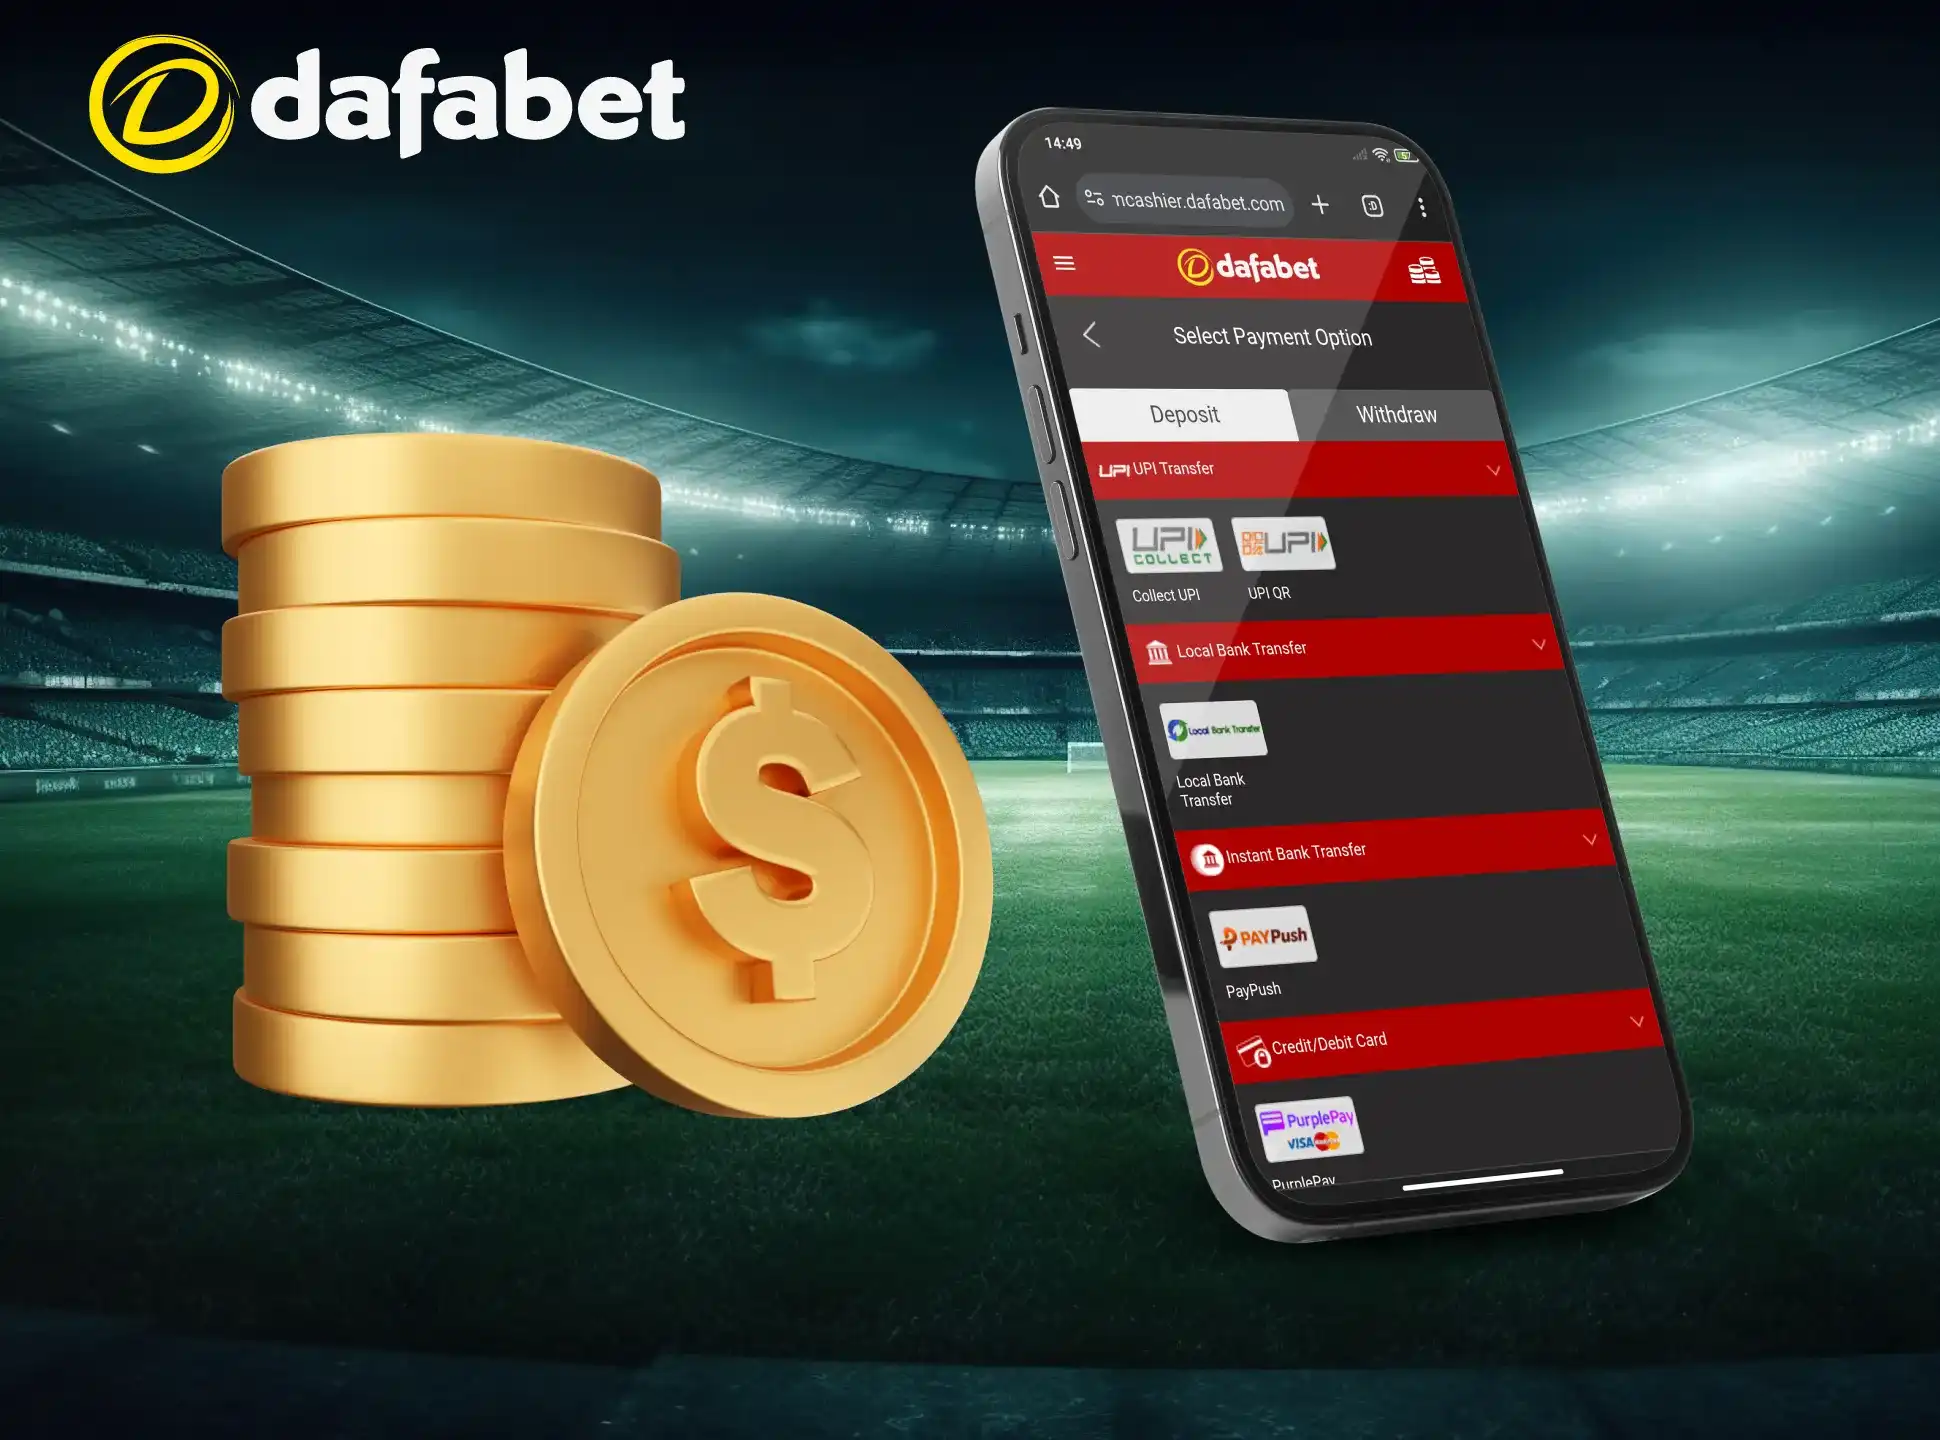 You can deposit to your Dafabet account by following the instructions.